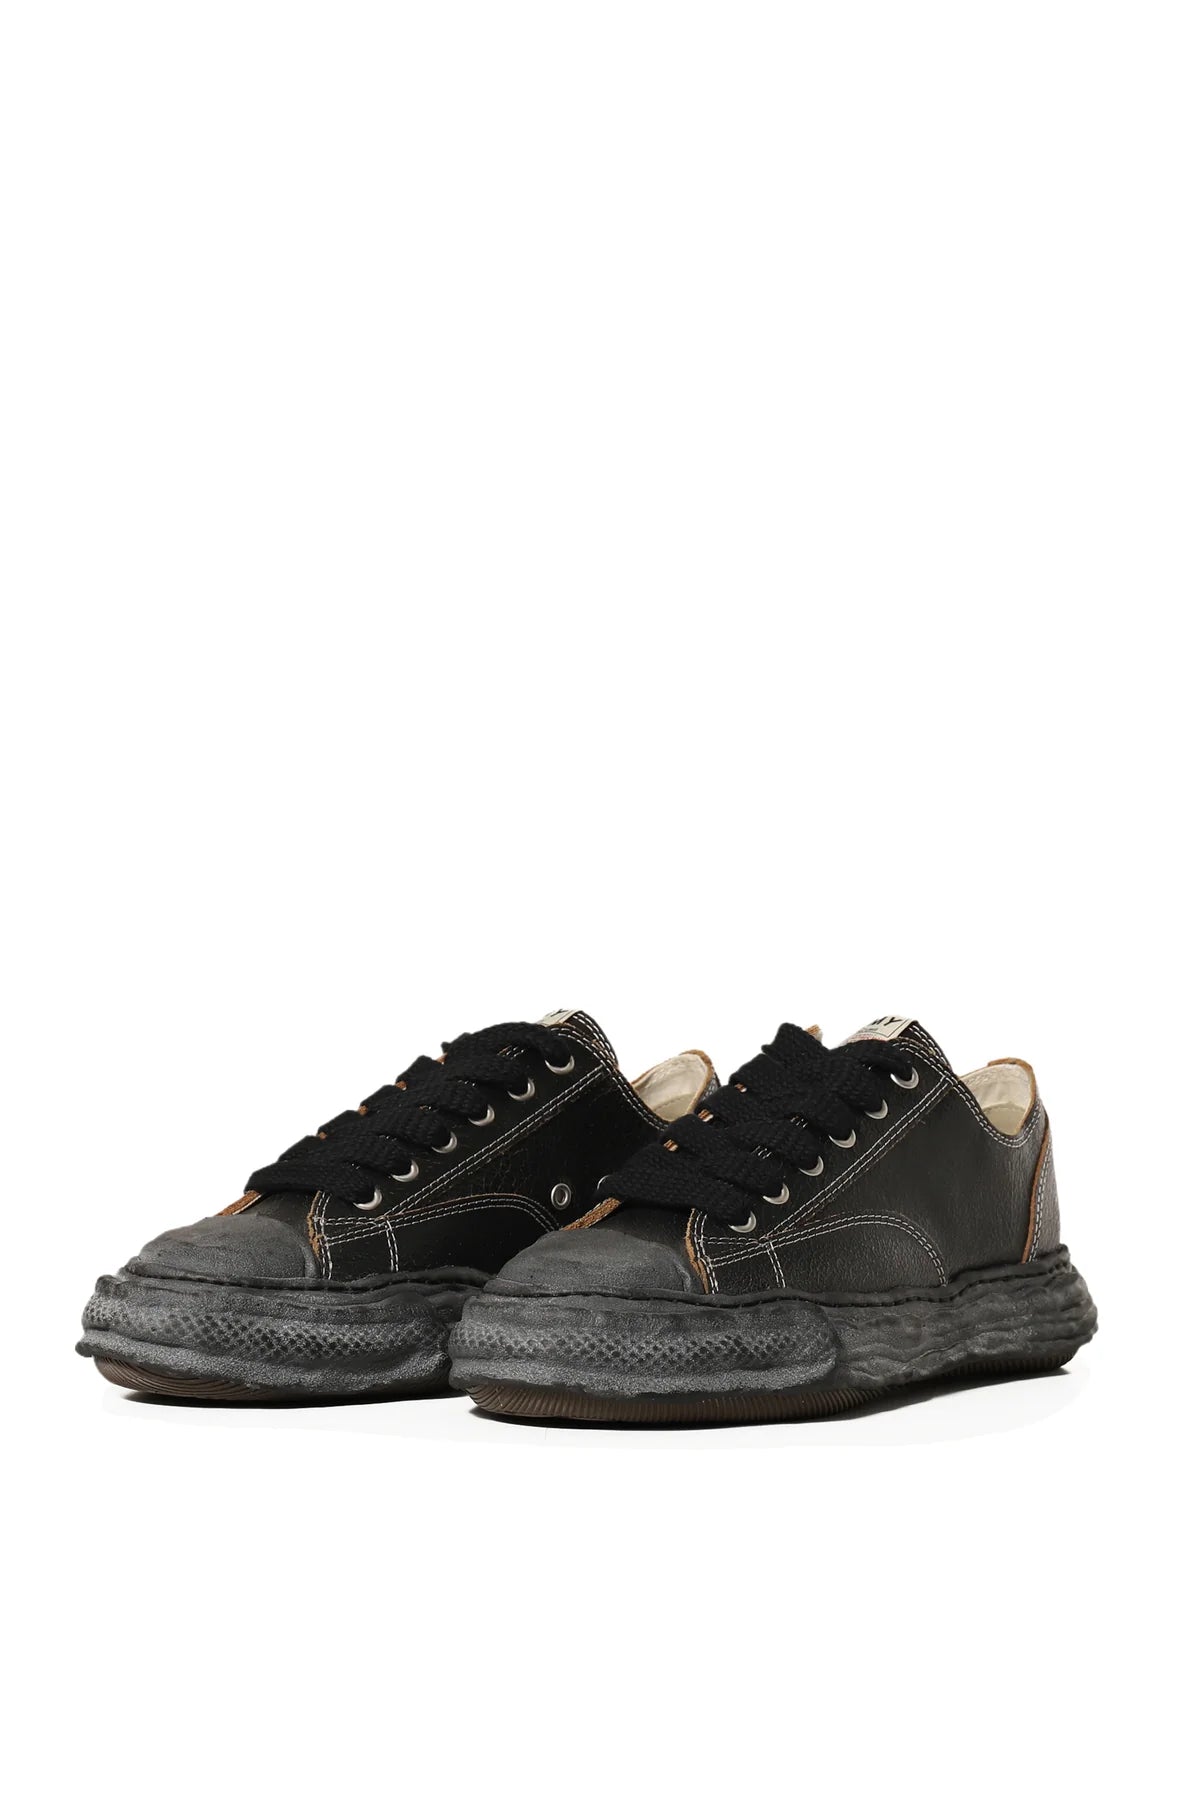 Maison Mihara Peterson 23 Low Cracking Leather (BLACK)